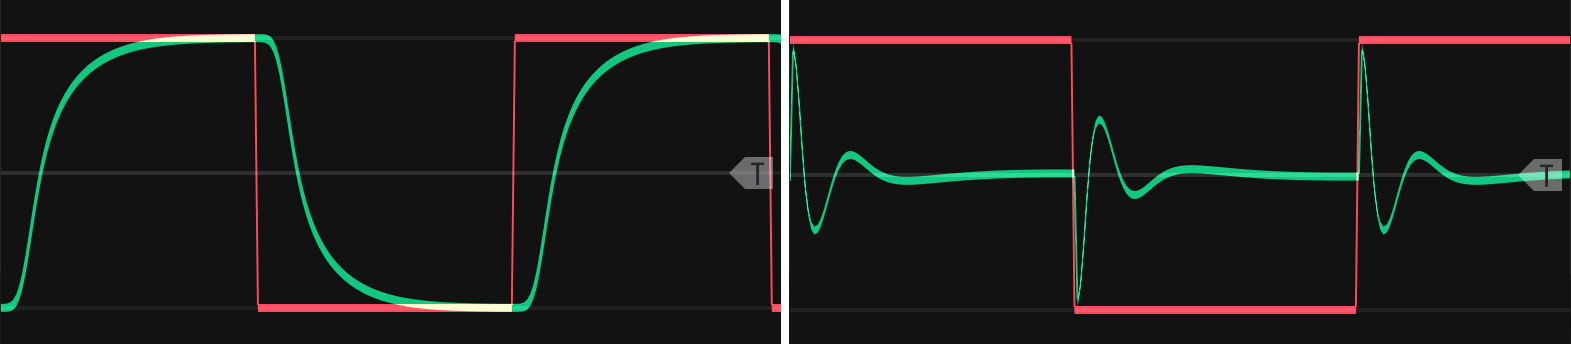 Square wave through a low-pass (left) and high-pass (right) filter. Note the symmetry of the difference between the square wave and the filtered signal: the shape of the filtered signal below the square wave in the positive region is the same as the filtered signal above the square wave in the negative region, but flipped.